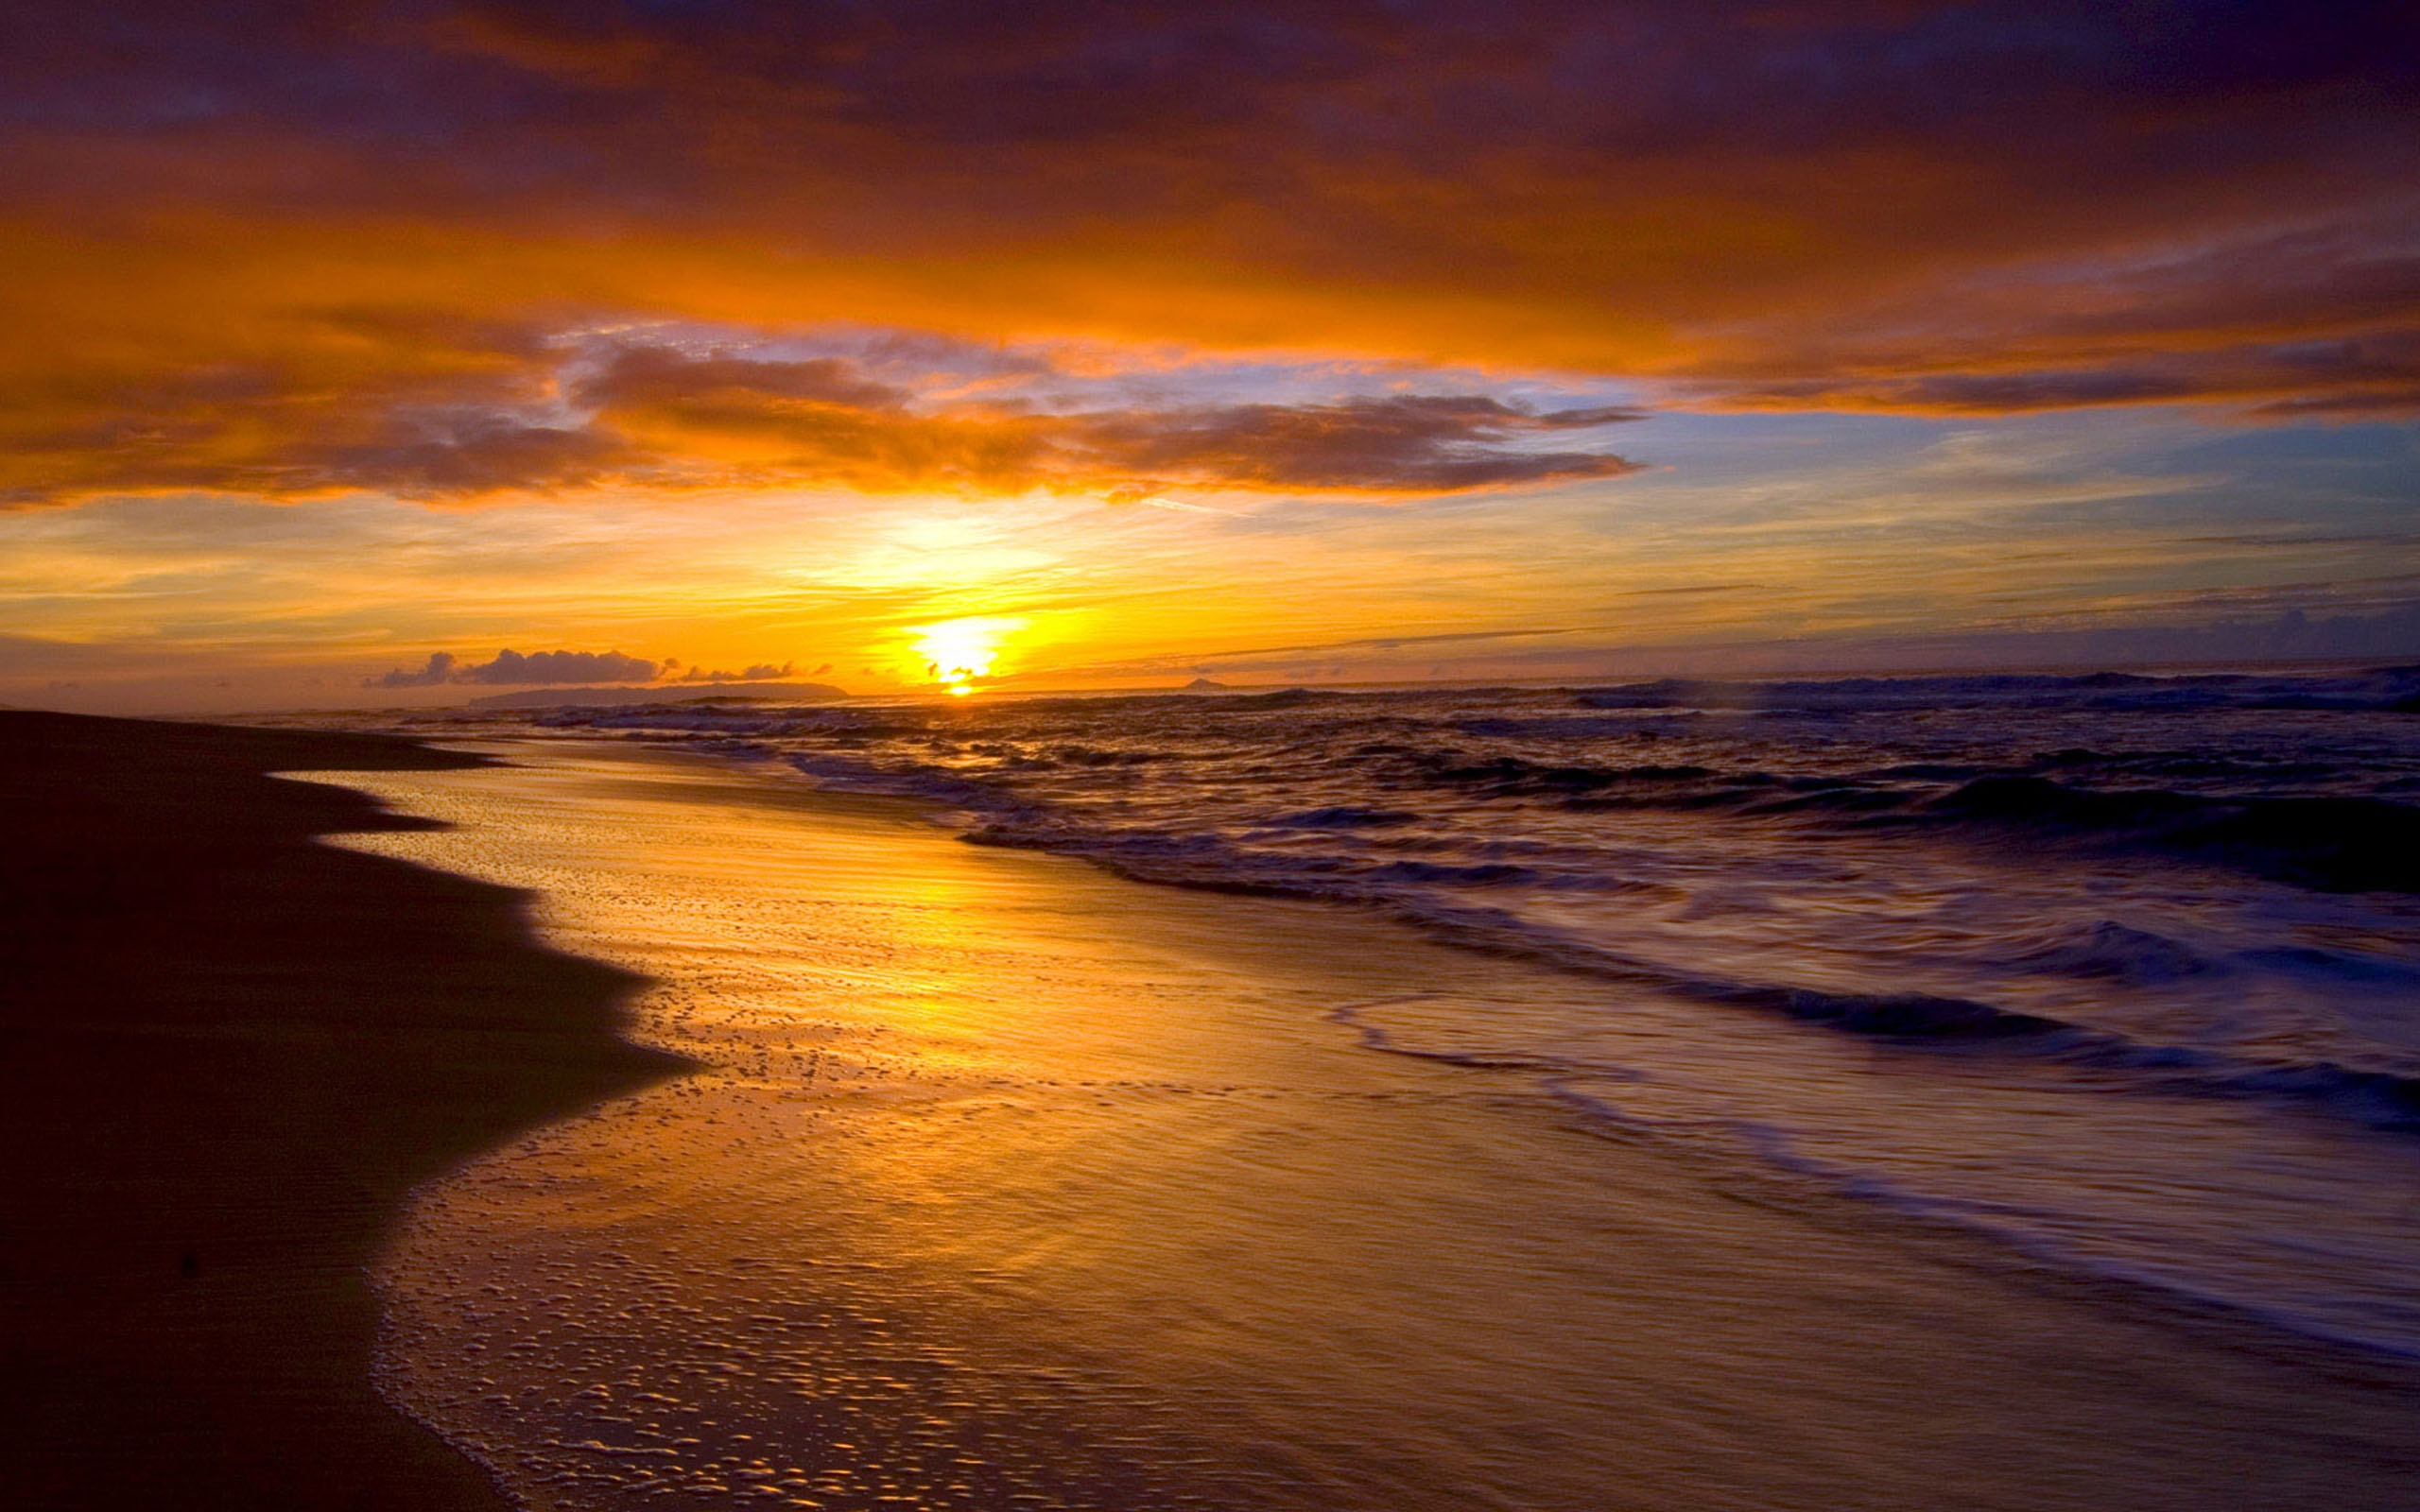 Sunset on the beach, a popular resort wallpapers and images